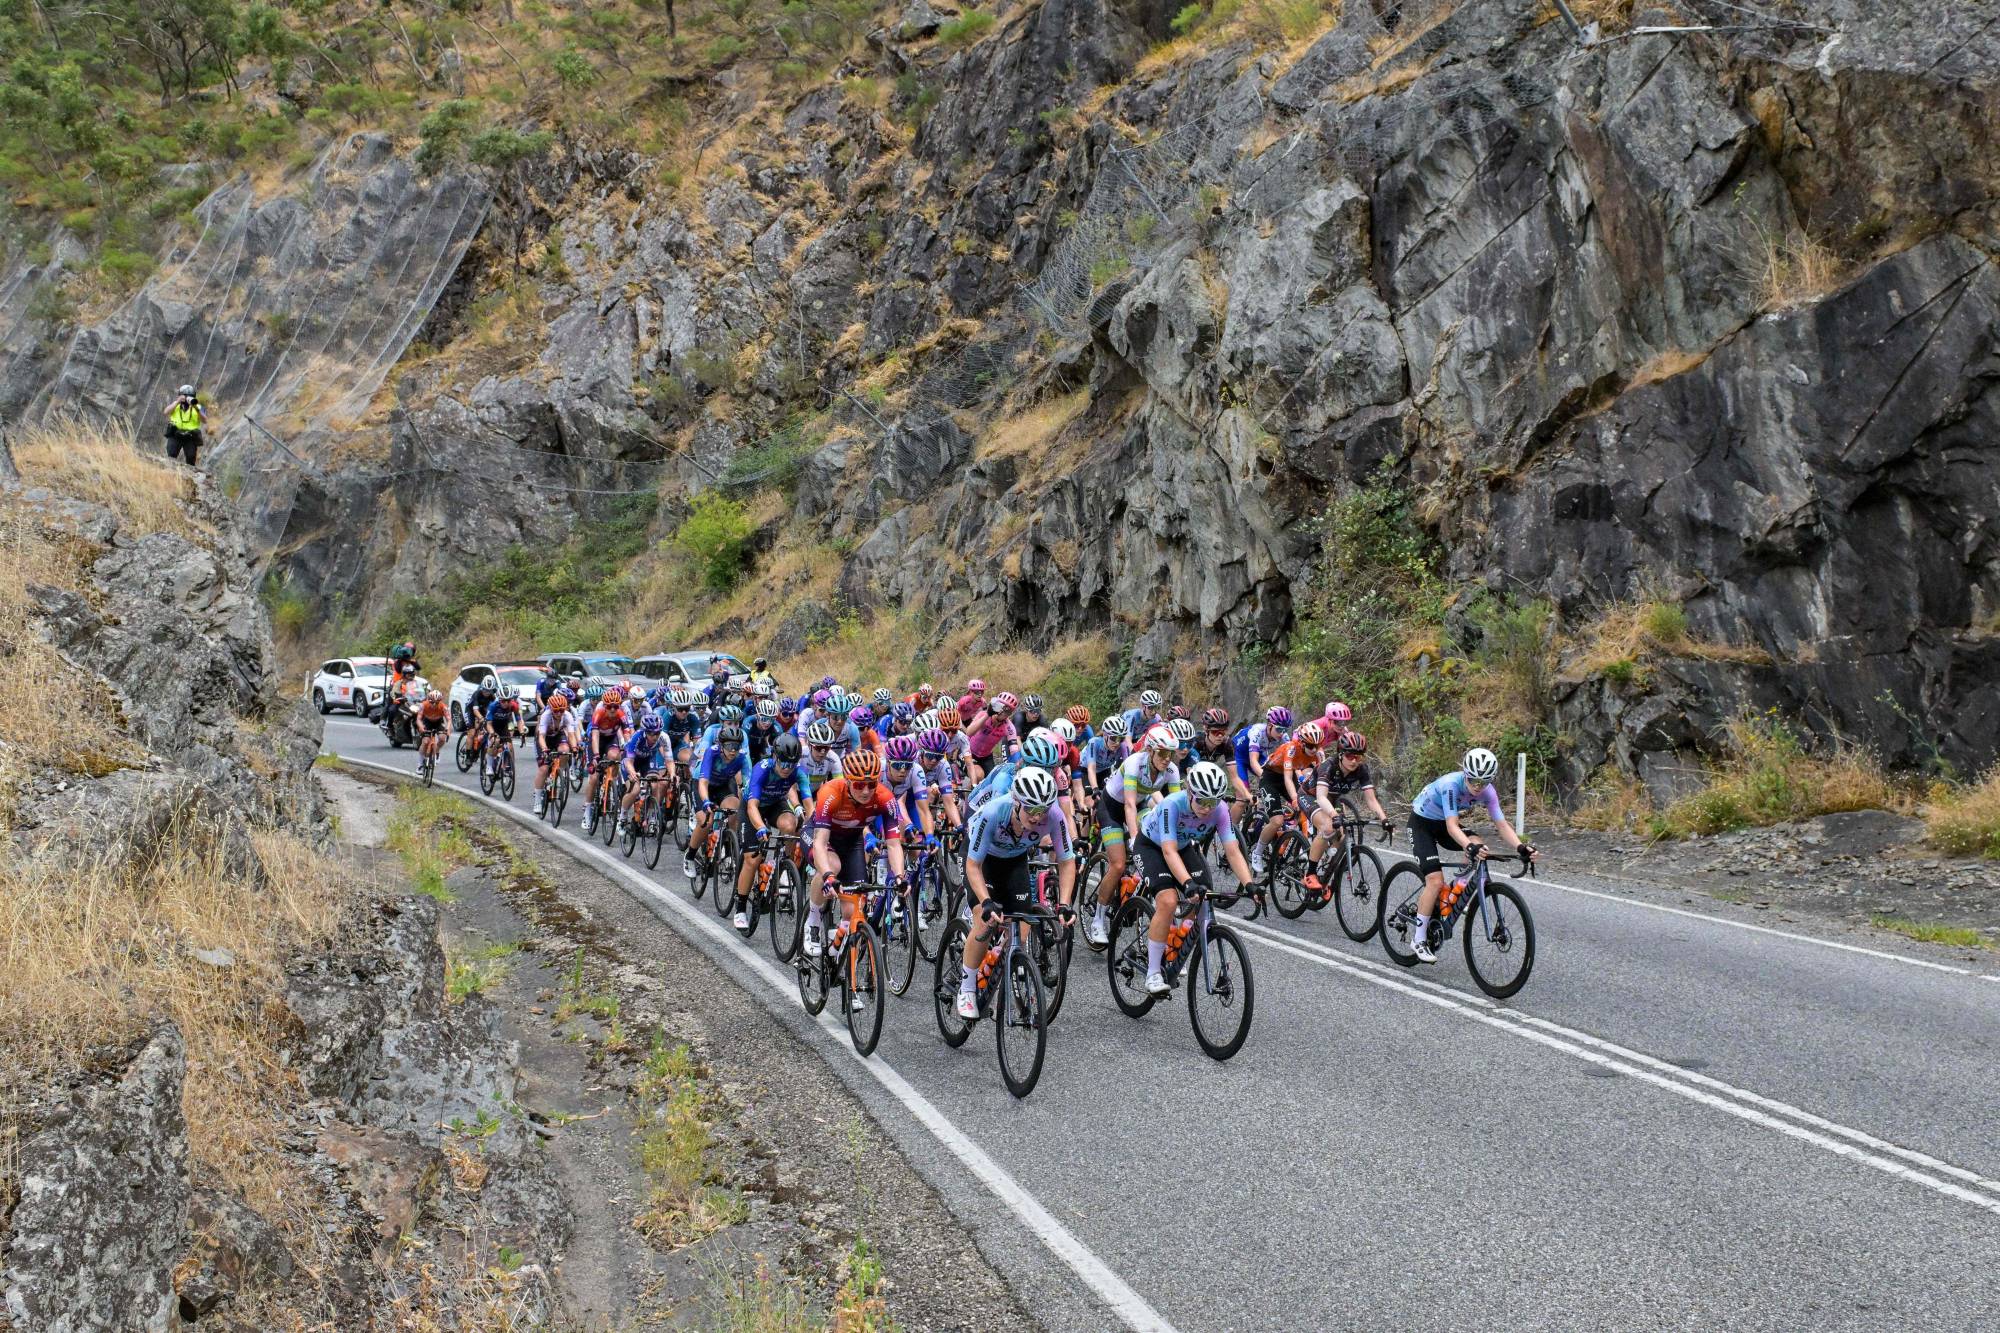 Competitors in the Women's Tour Down Under ride along Gorge Road during the third stage of the event in Adelaide on Tuesday. | AFP-JIJI